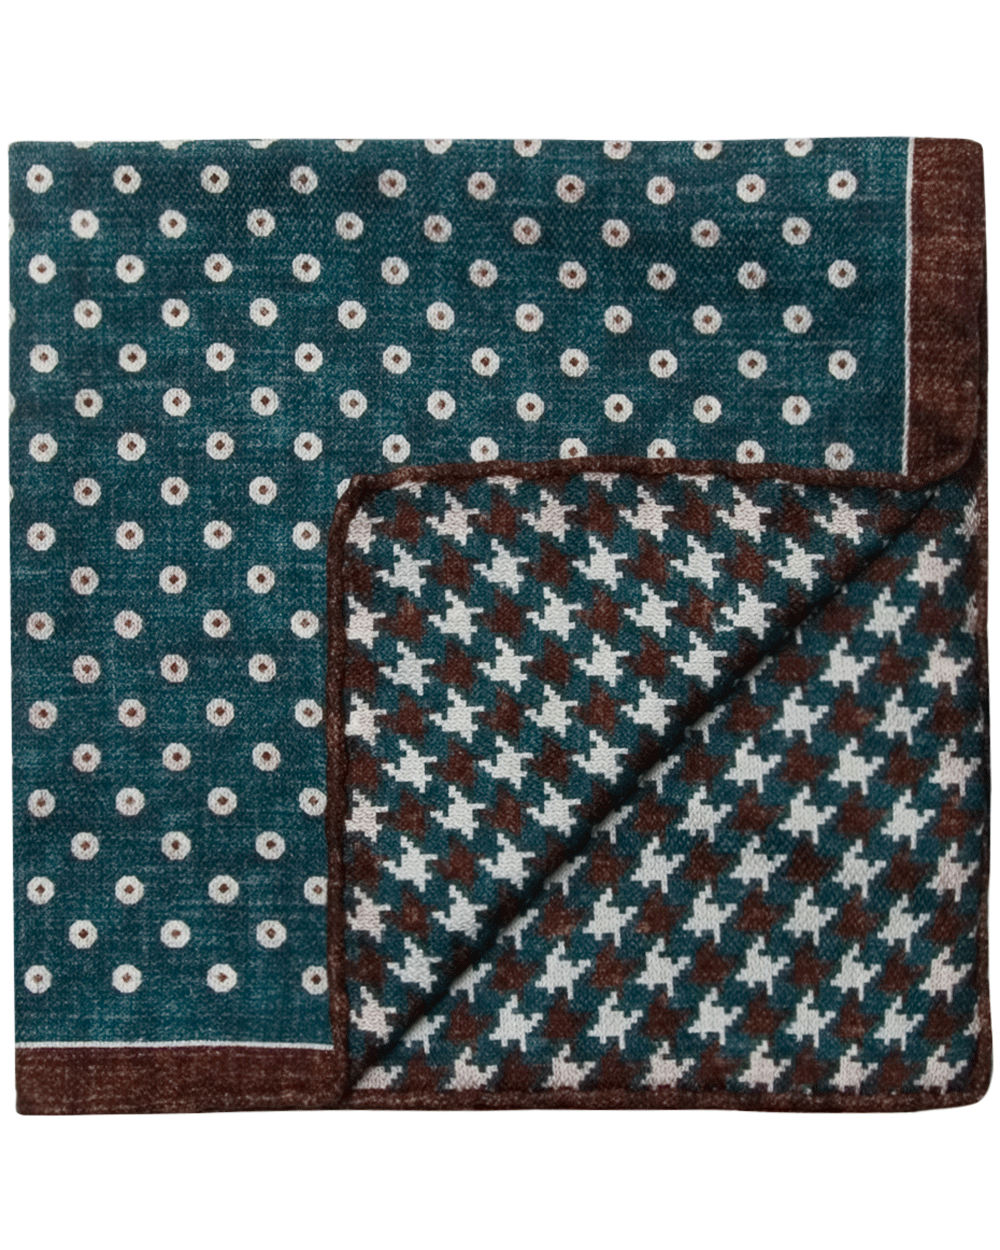 Green and Brown Dots Houndstooth Reversible Pocket Square